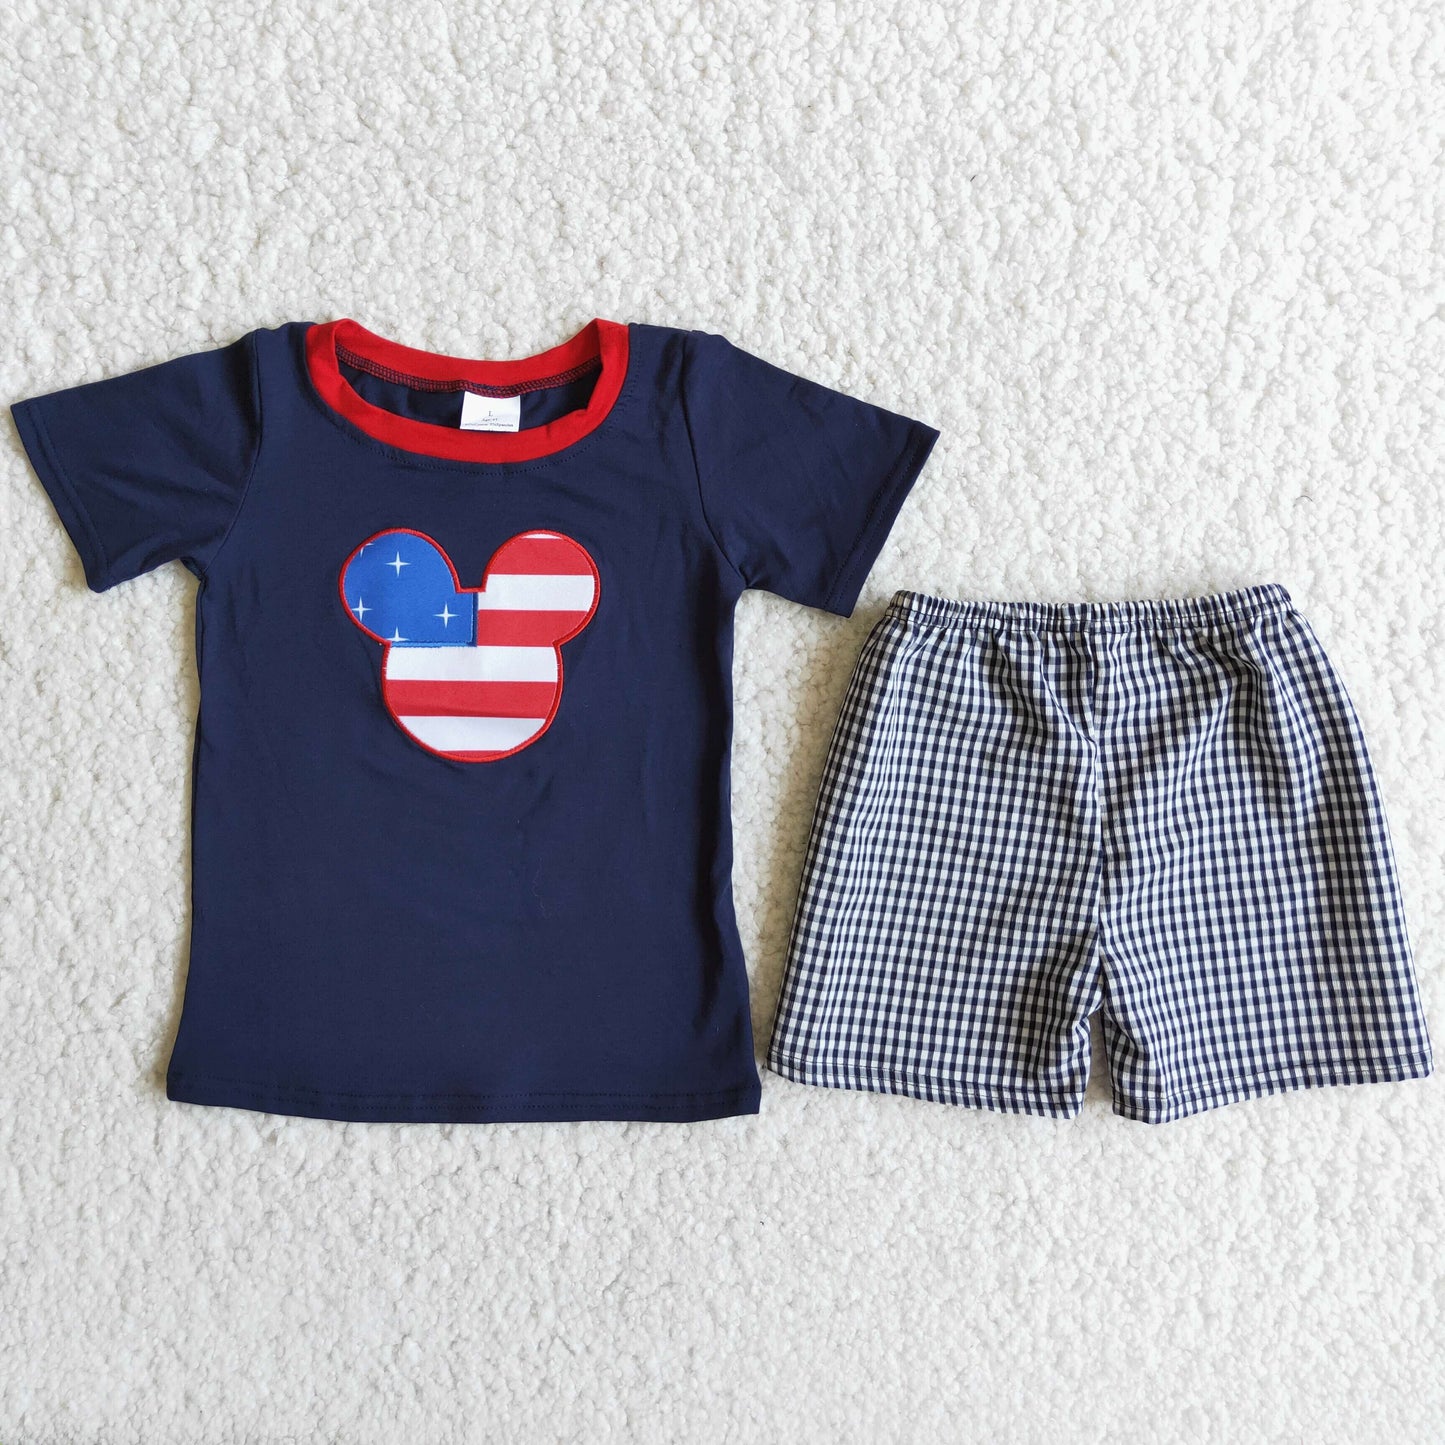 Baby Boy Summer Embroidery Navy Blue Plaid Shorts Outfit